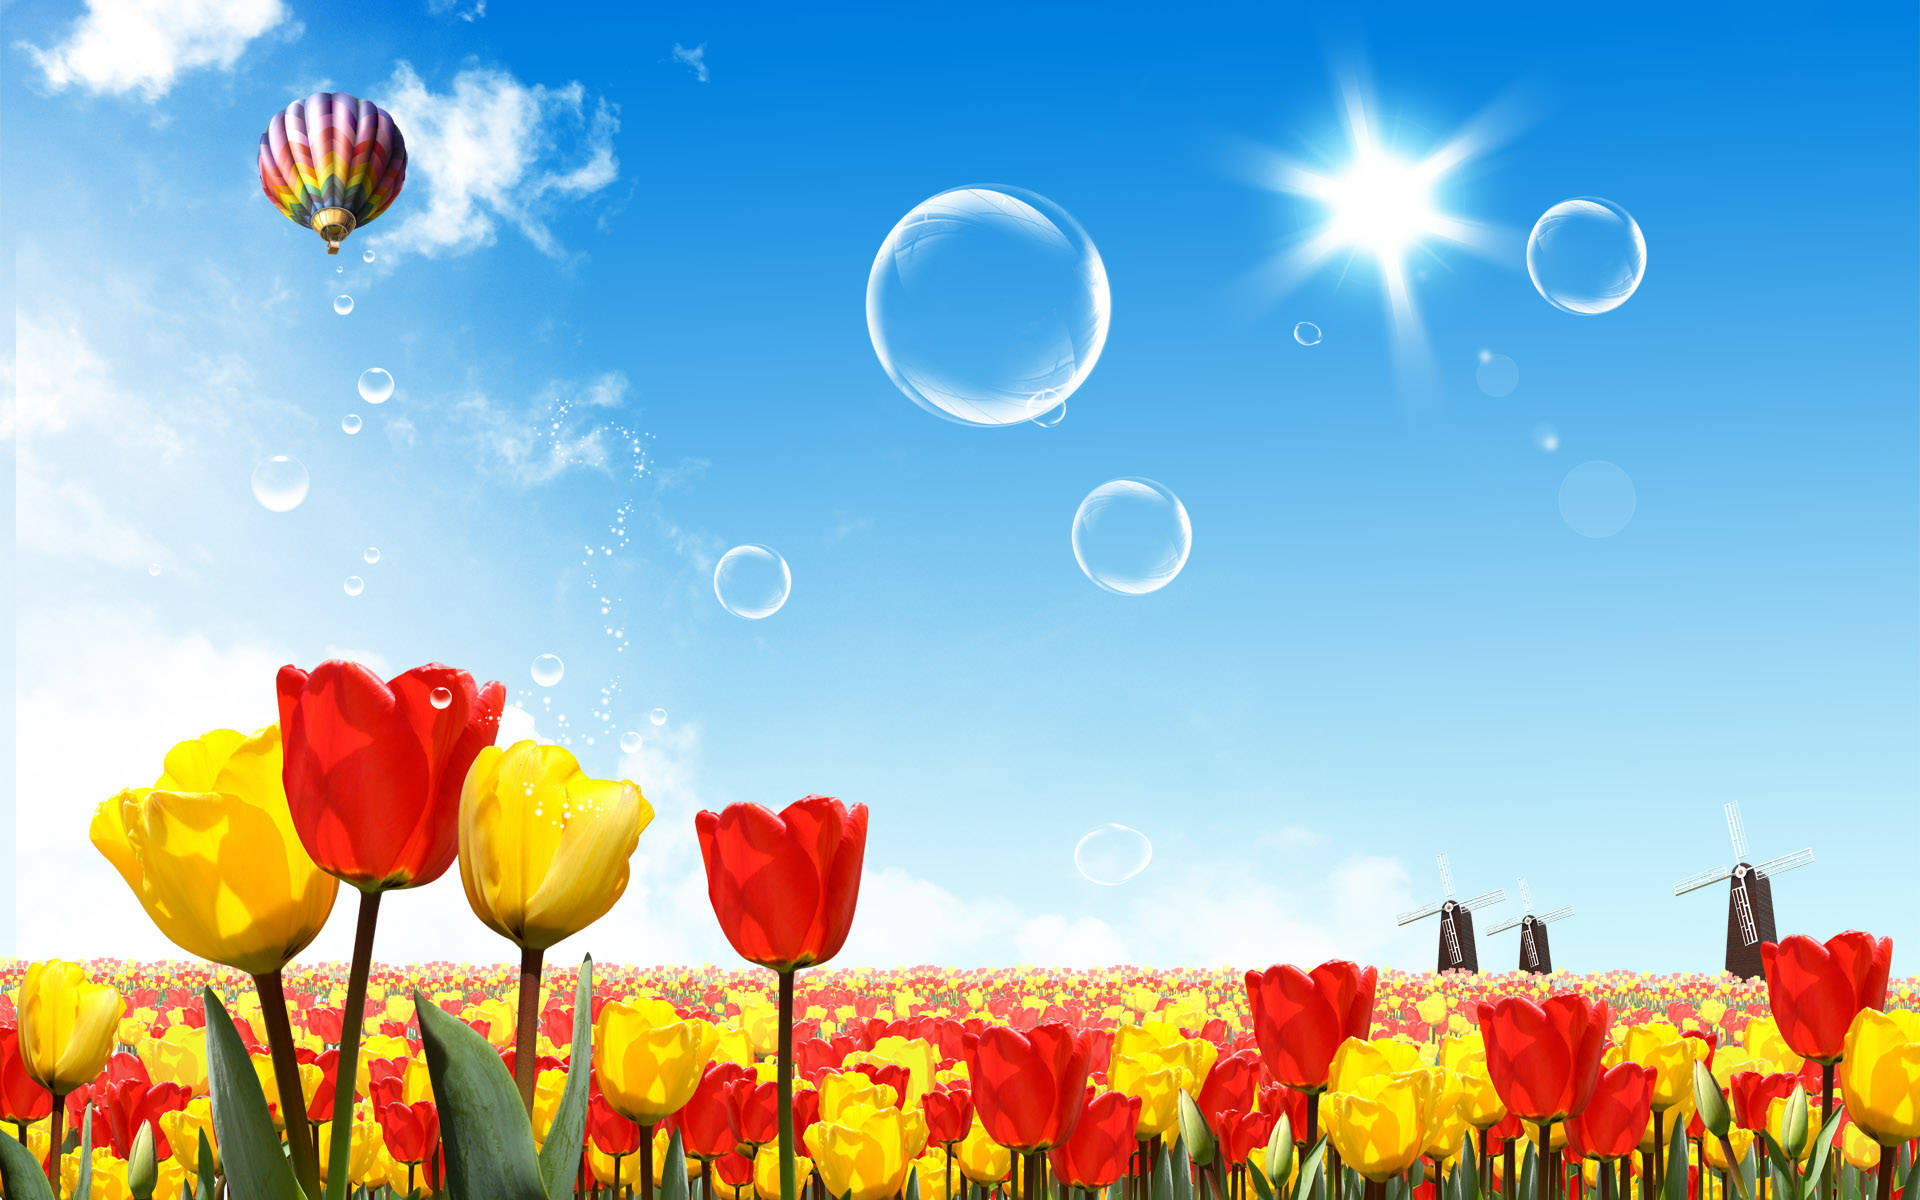 Red Yellow Tulips On Summer Morning Screen Saver Wallpaper